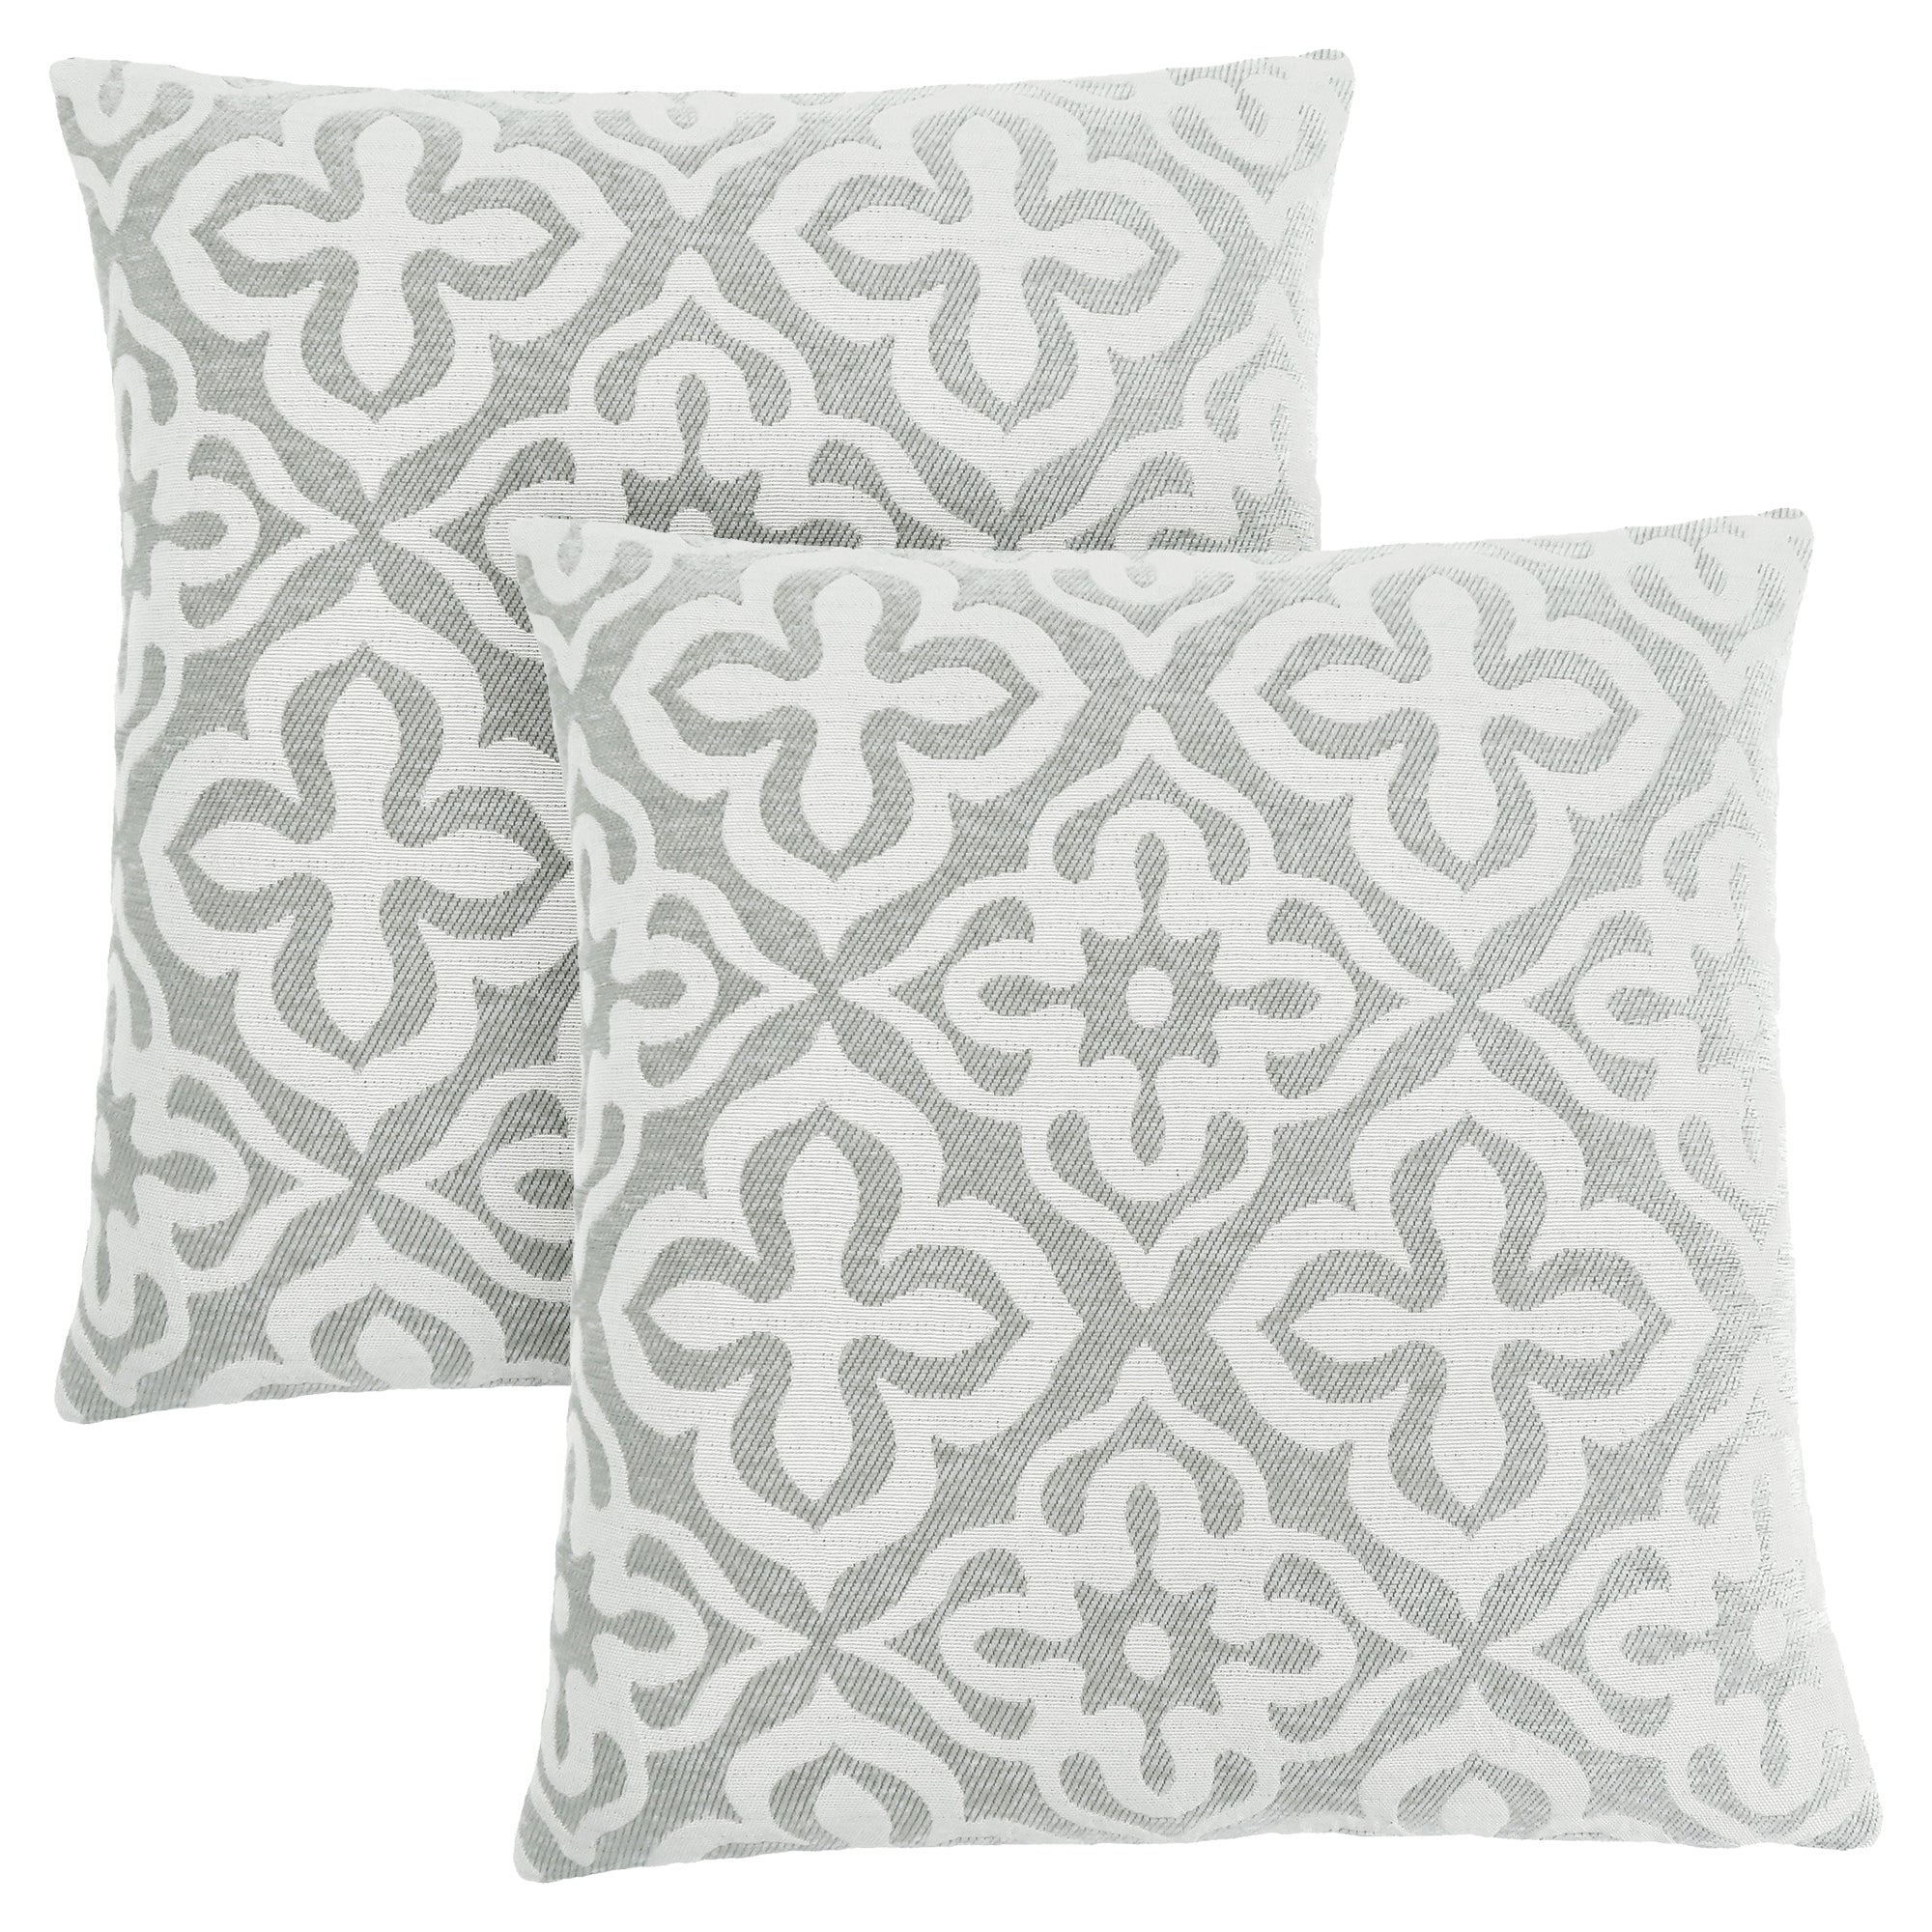 MN-359215    Pillows, Set Of 2, 18 X 18 Square, Insert Included, Decorative Throw, Accent, Sofa, Couch, Bed, Soft Polyester Woven Fabric, Hypoallergenic Soft Polyester Insert, Light Grey, Motif Design, Contemporary, Modern